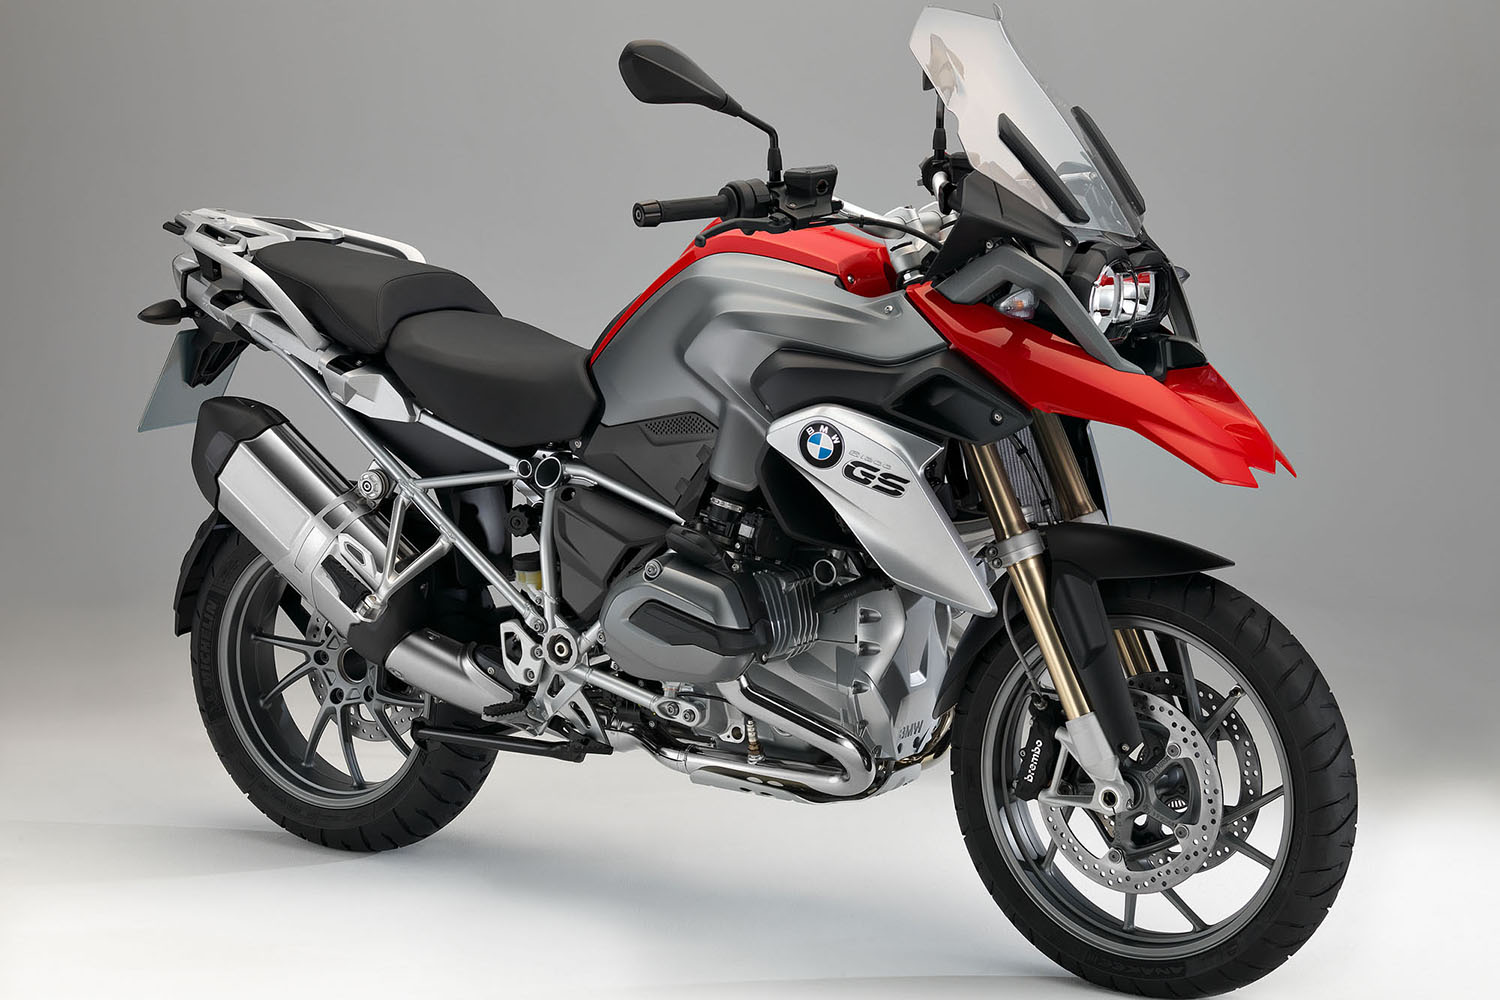 The new 2014ten BMW R1200GS